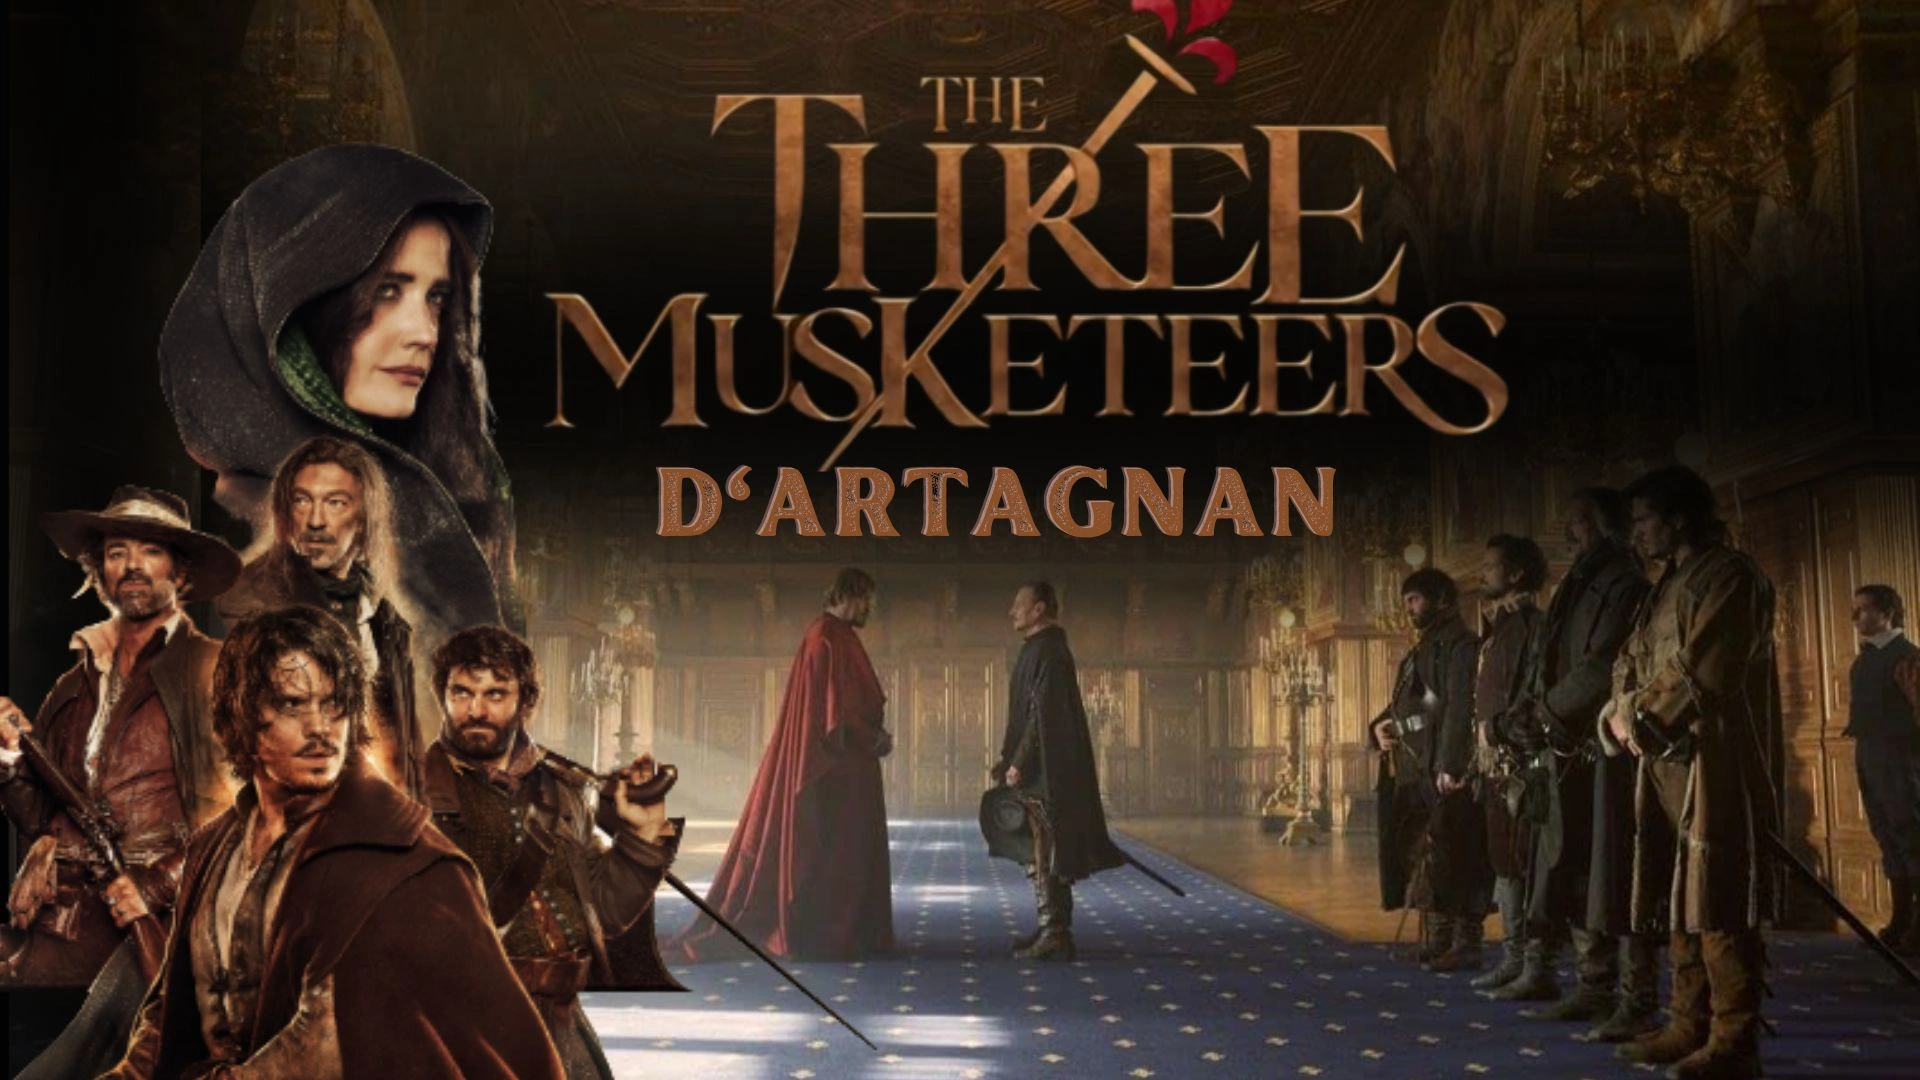 The-Three-Musketeers_-DArtagnan-Wallpaper-and-images-2.webp